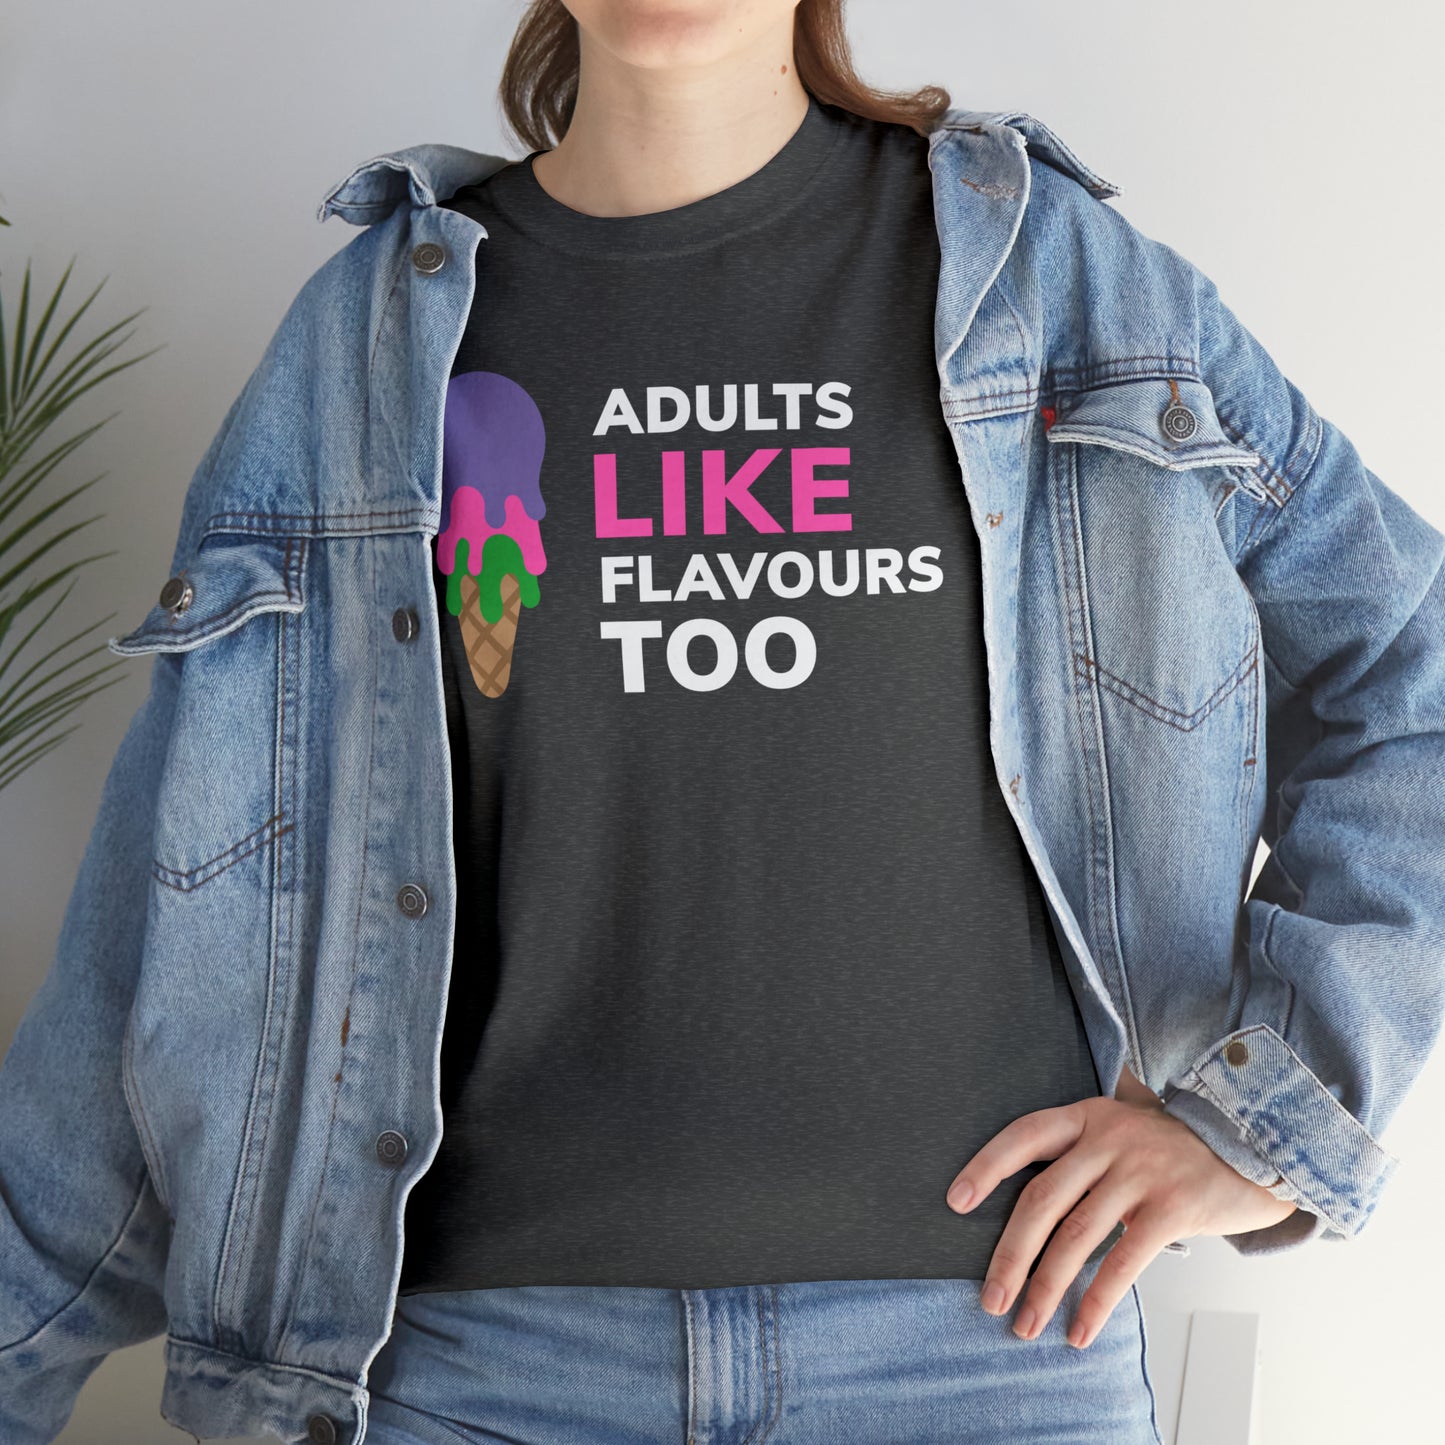 WVA "Adults Like Flavours Too" Unisex Heavy Cotton Tee (EU Only)